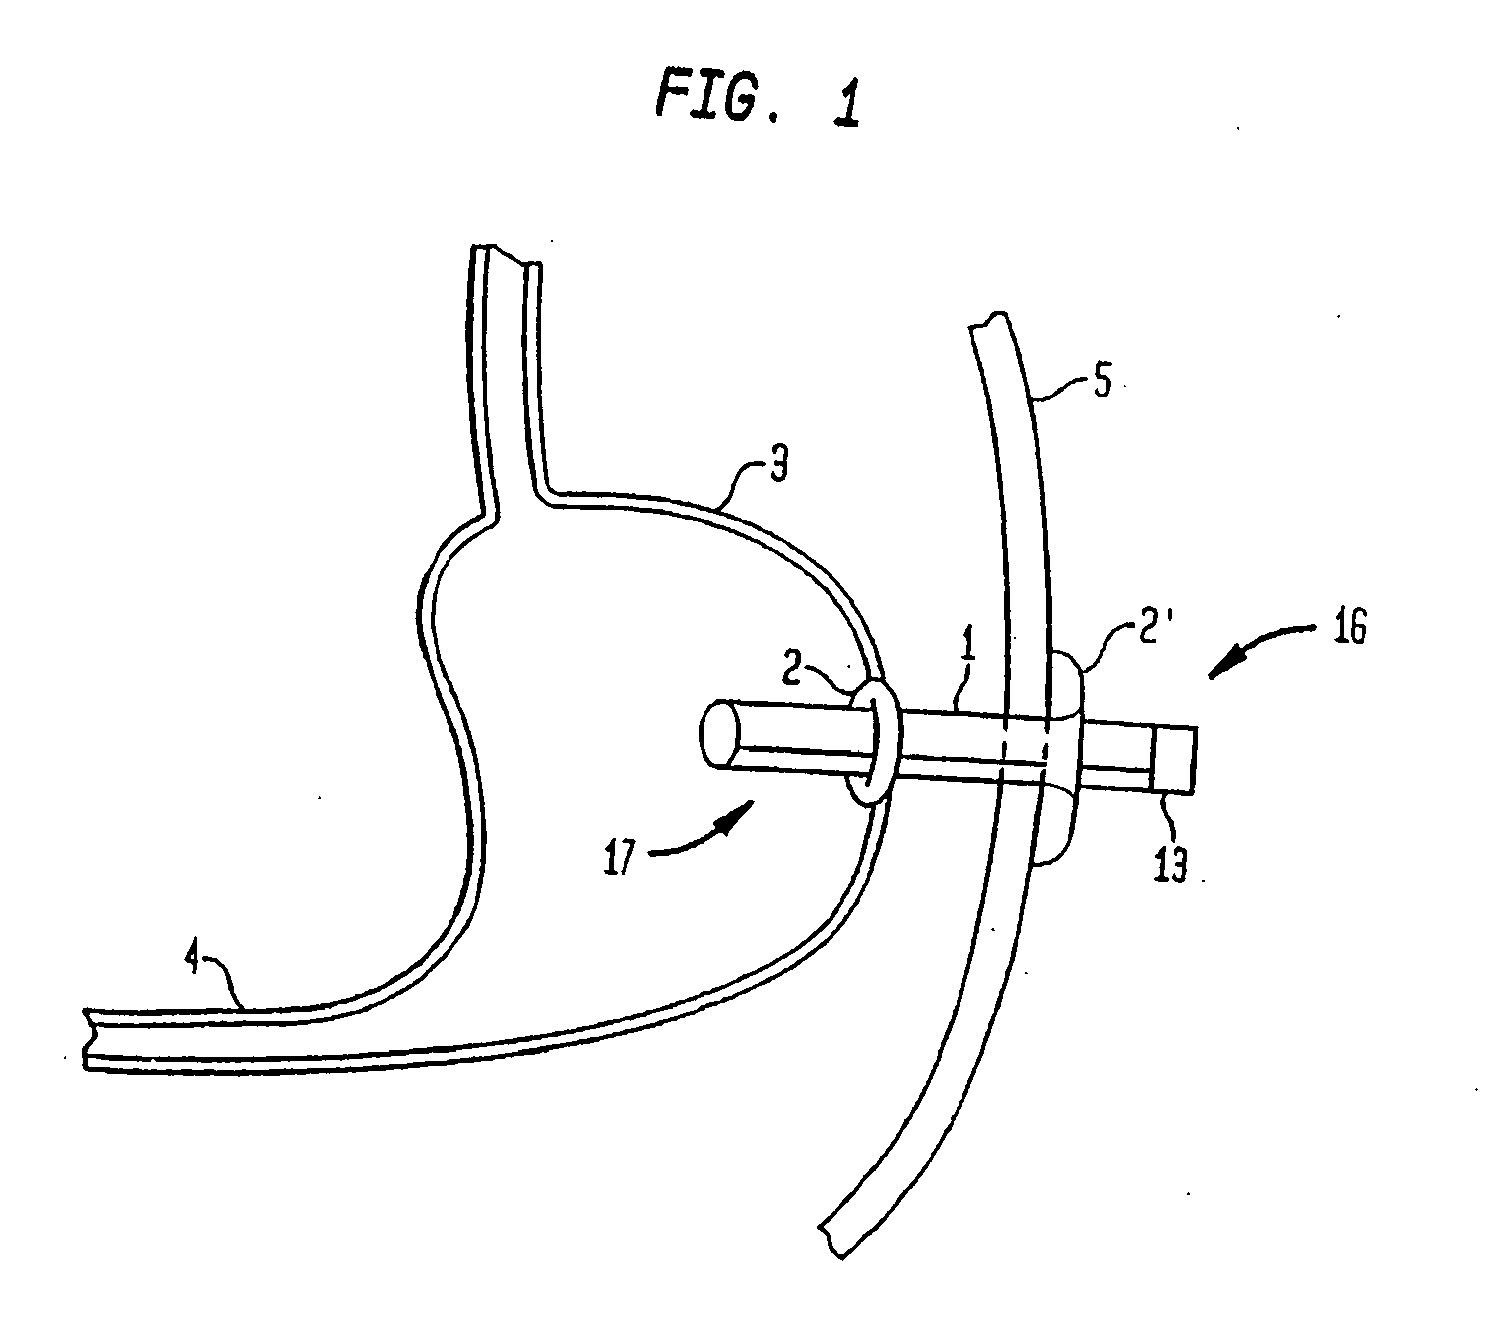 Shunt Apparatus For Treating Obesity By Extracting Food